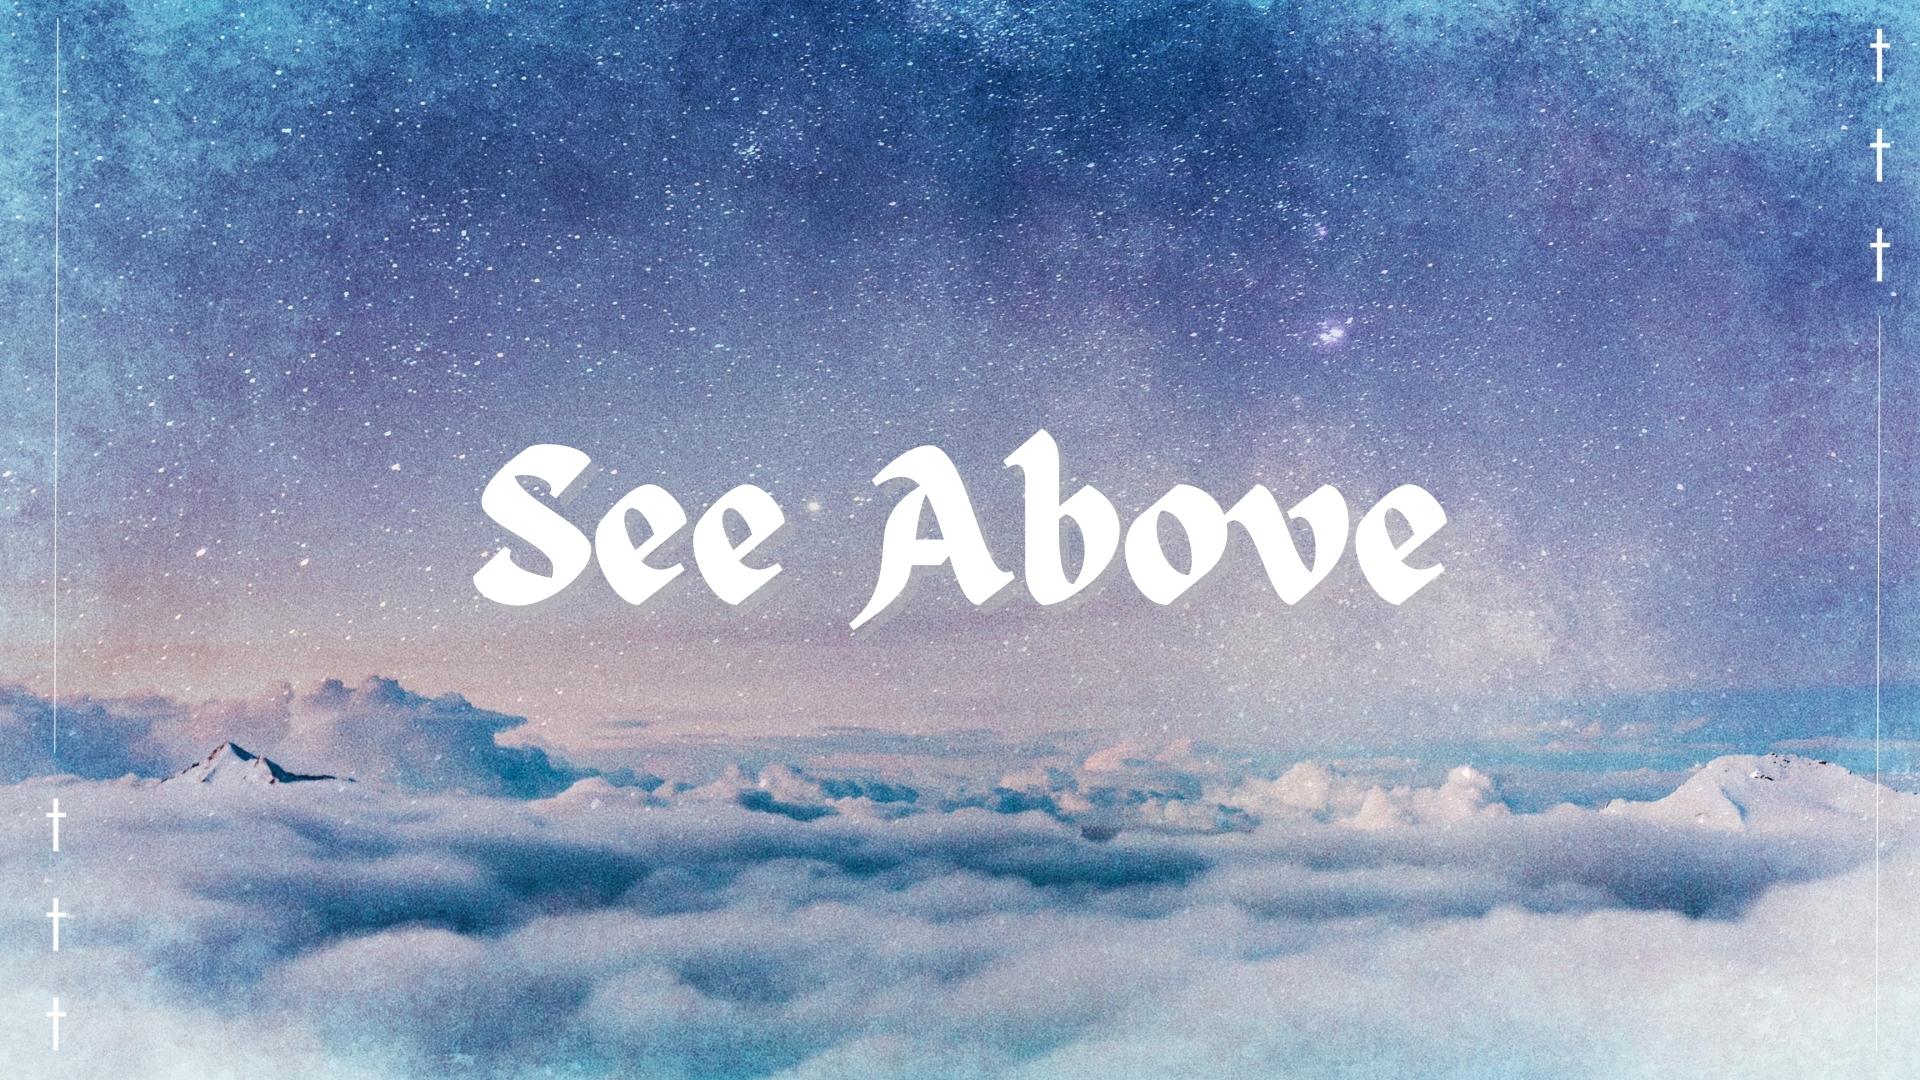 See Above